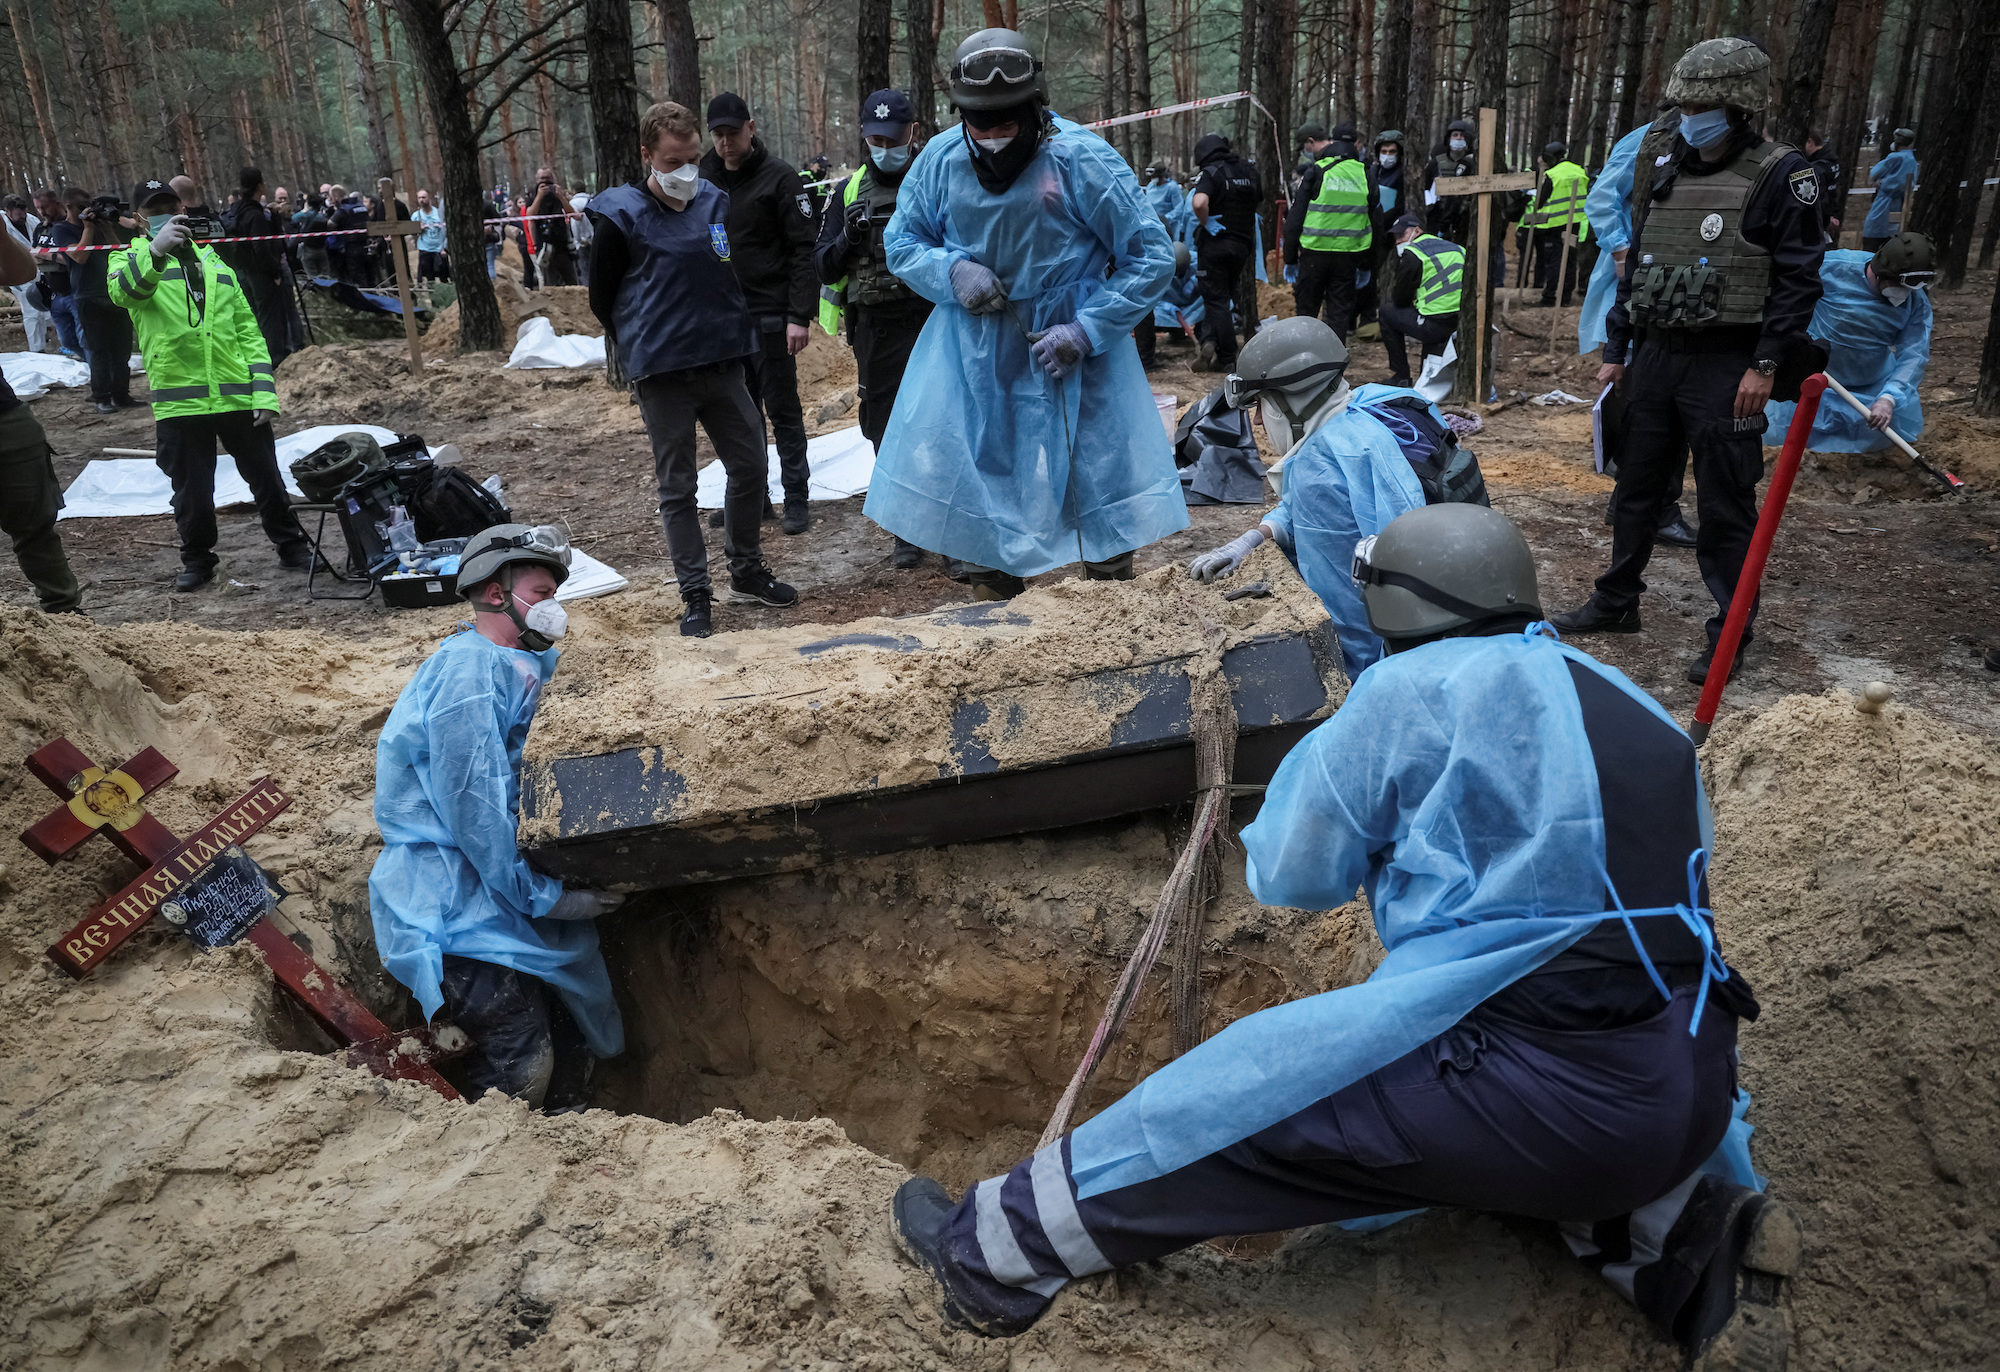 Members of the Ukrainian Emergency Service work on an exhumation of a mass burial site in the town of Izium, Kharkiv region on September 16.